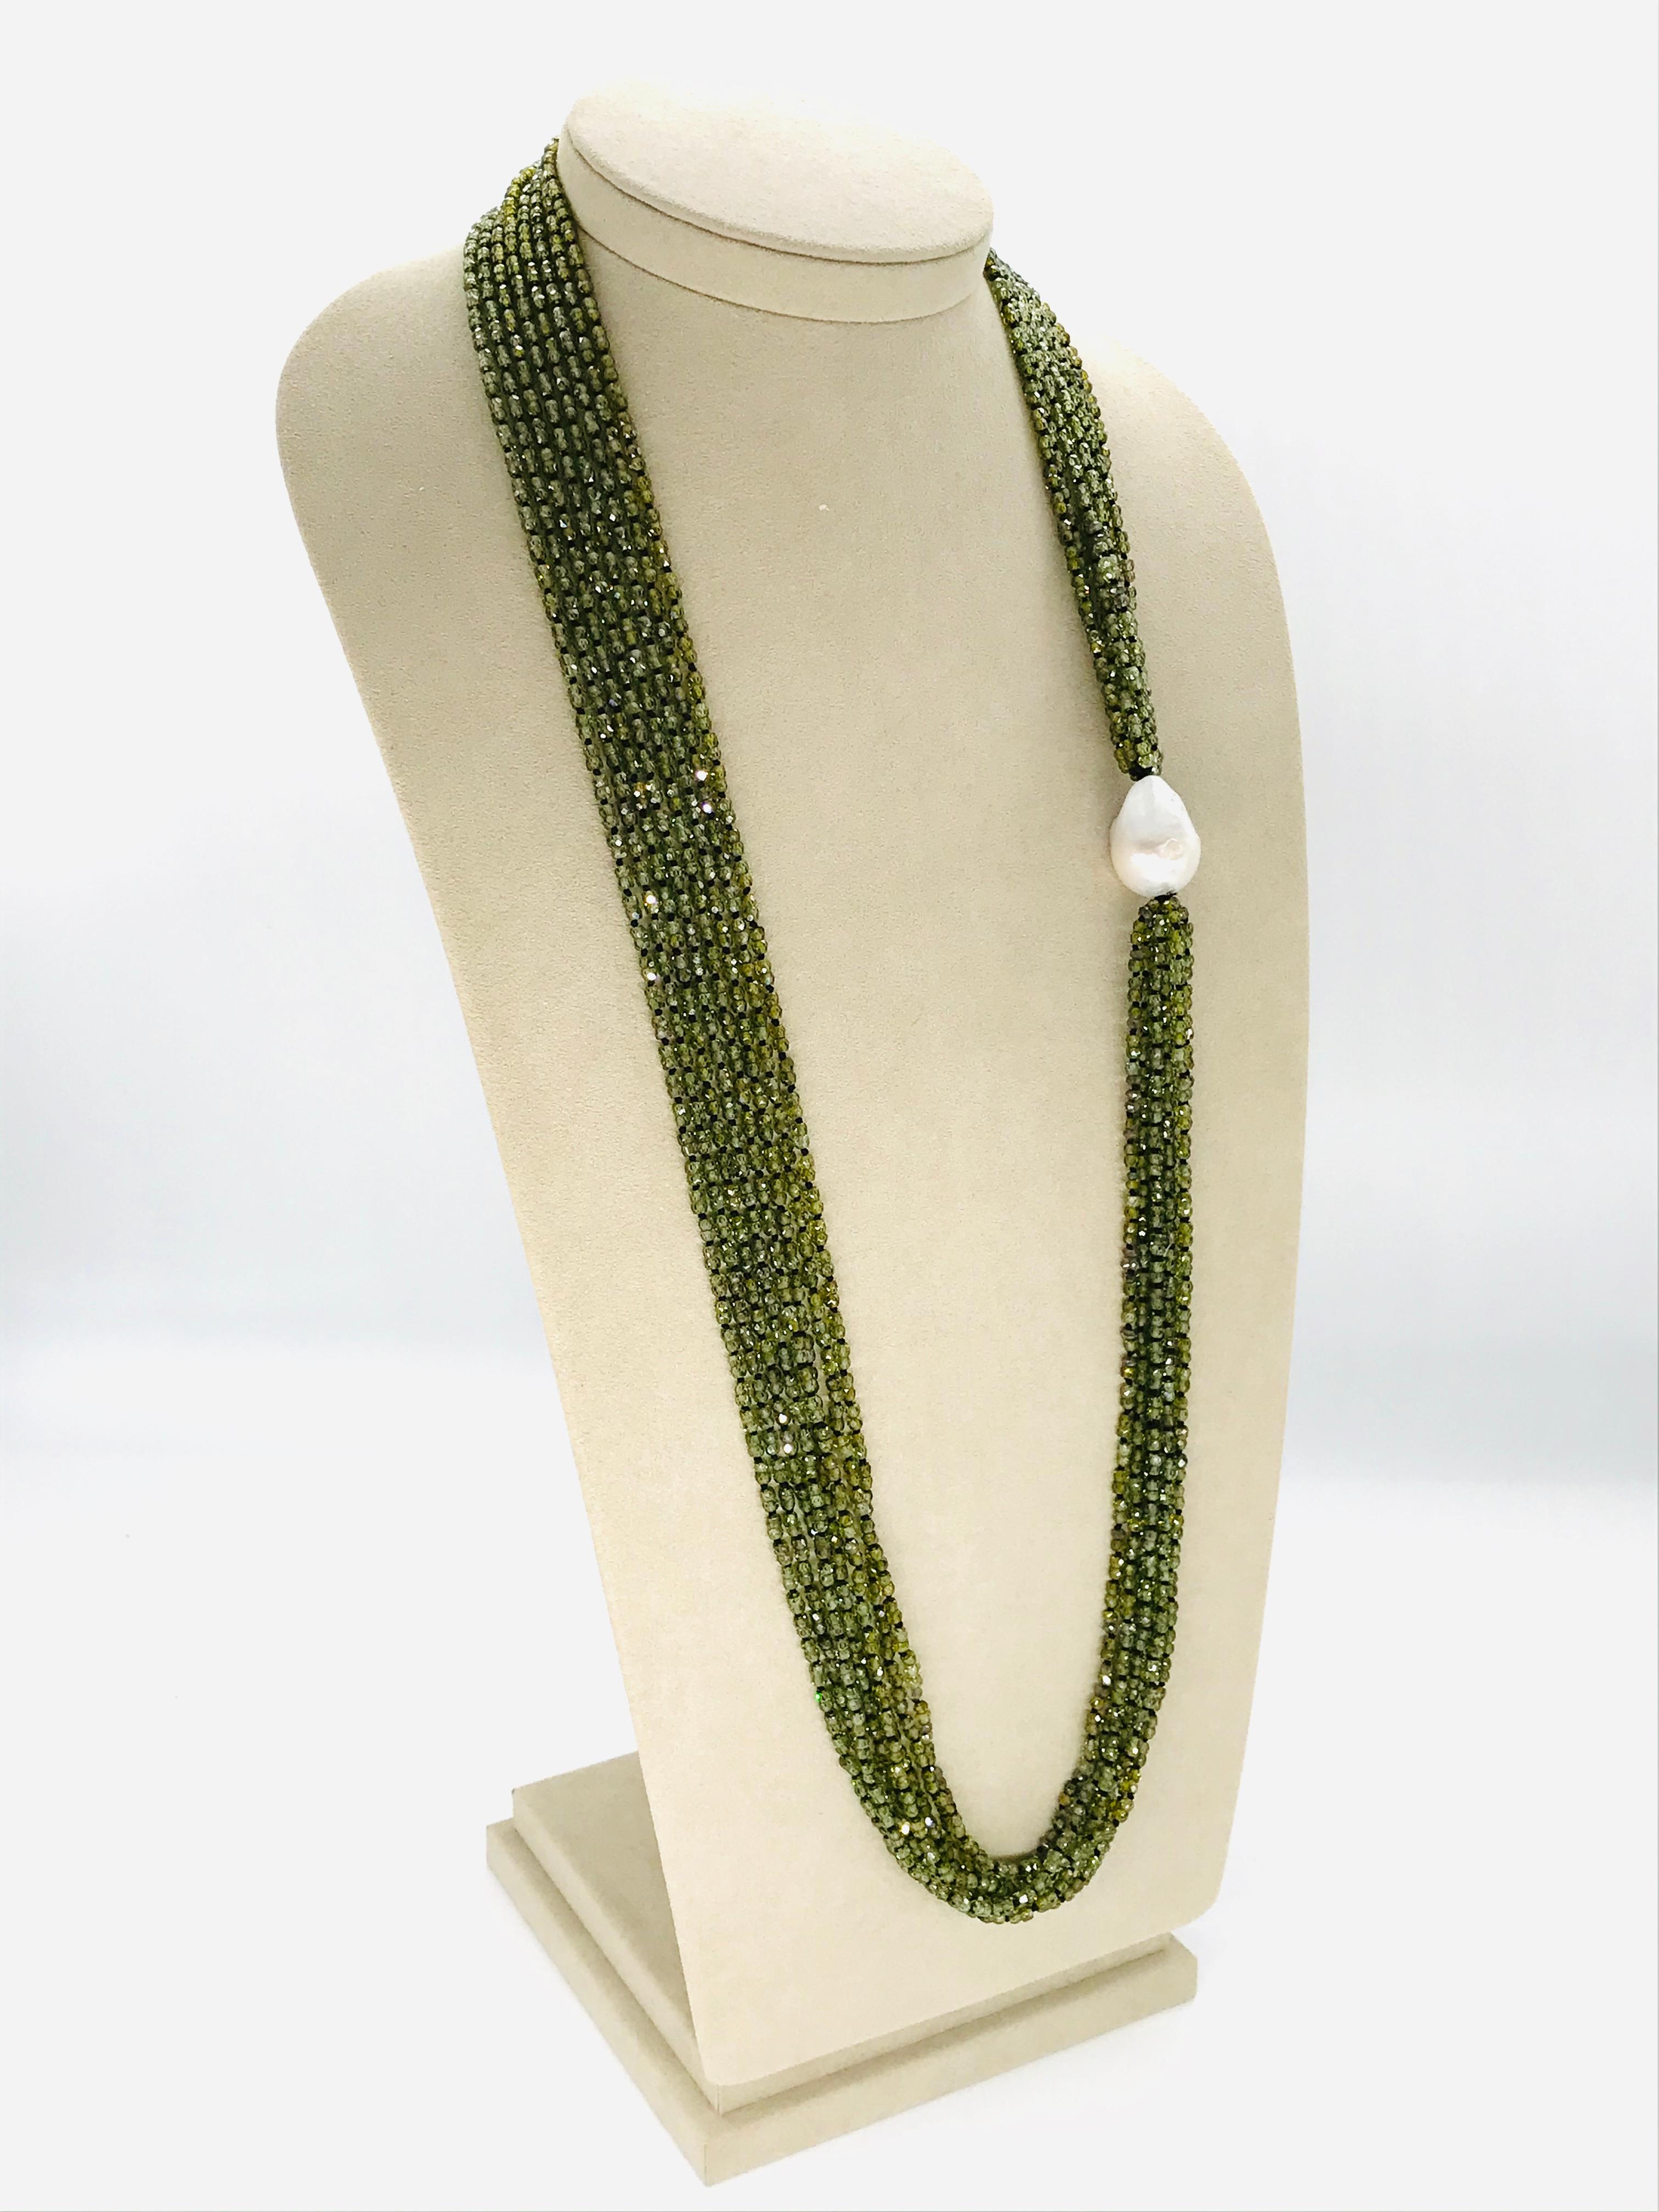 Olive Quartz Pearl Multi-Strand Necklaces 
Baroque South Sea Pearl 
Length Of Necklace 40 cm
Bakelite Security Claps 
